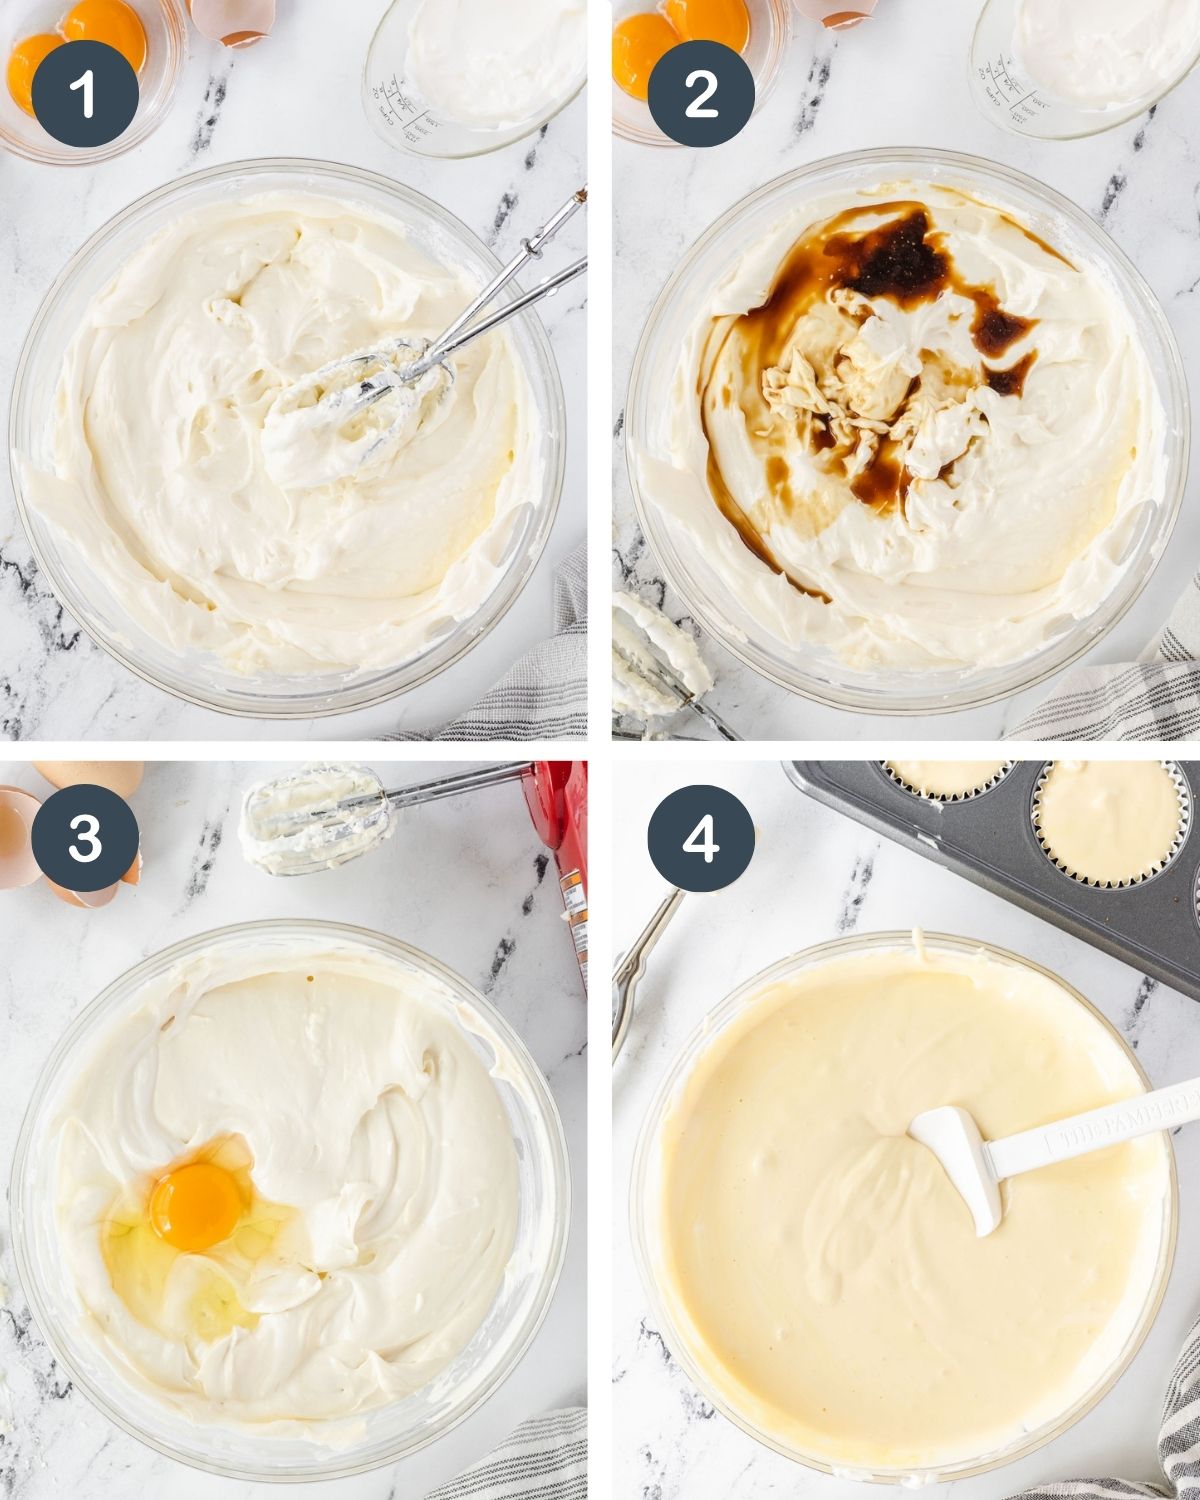 4 photo collage: 1) cream cheese beaten smooth, 2 vanilla extract on top, 3 egg added, 4 smooth batter.